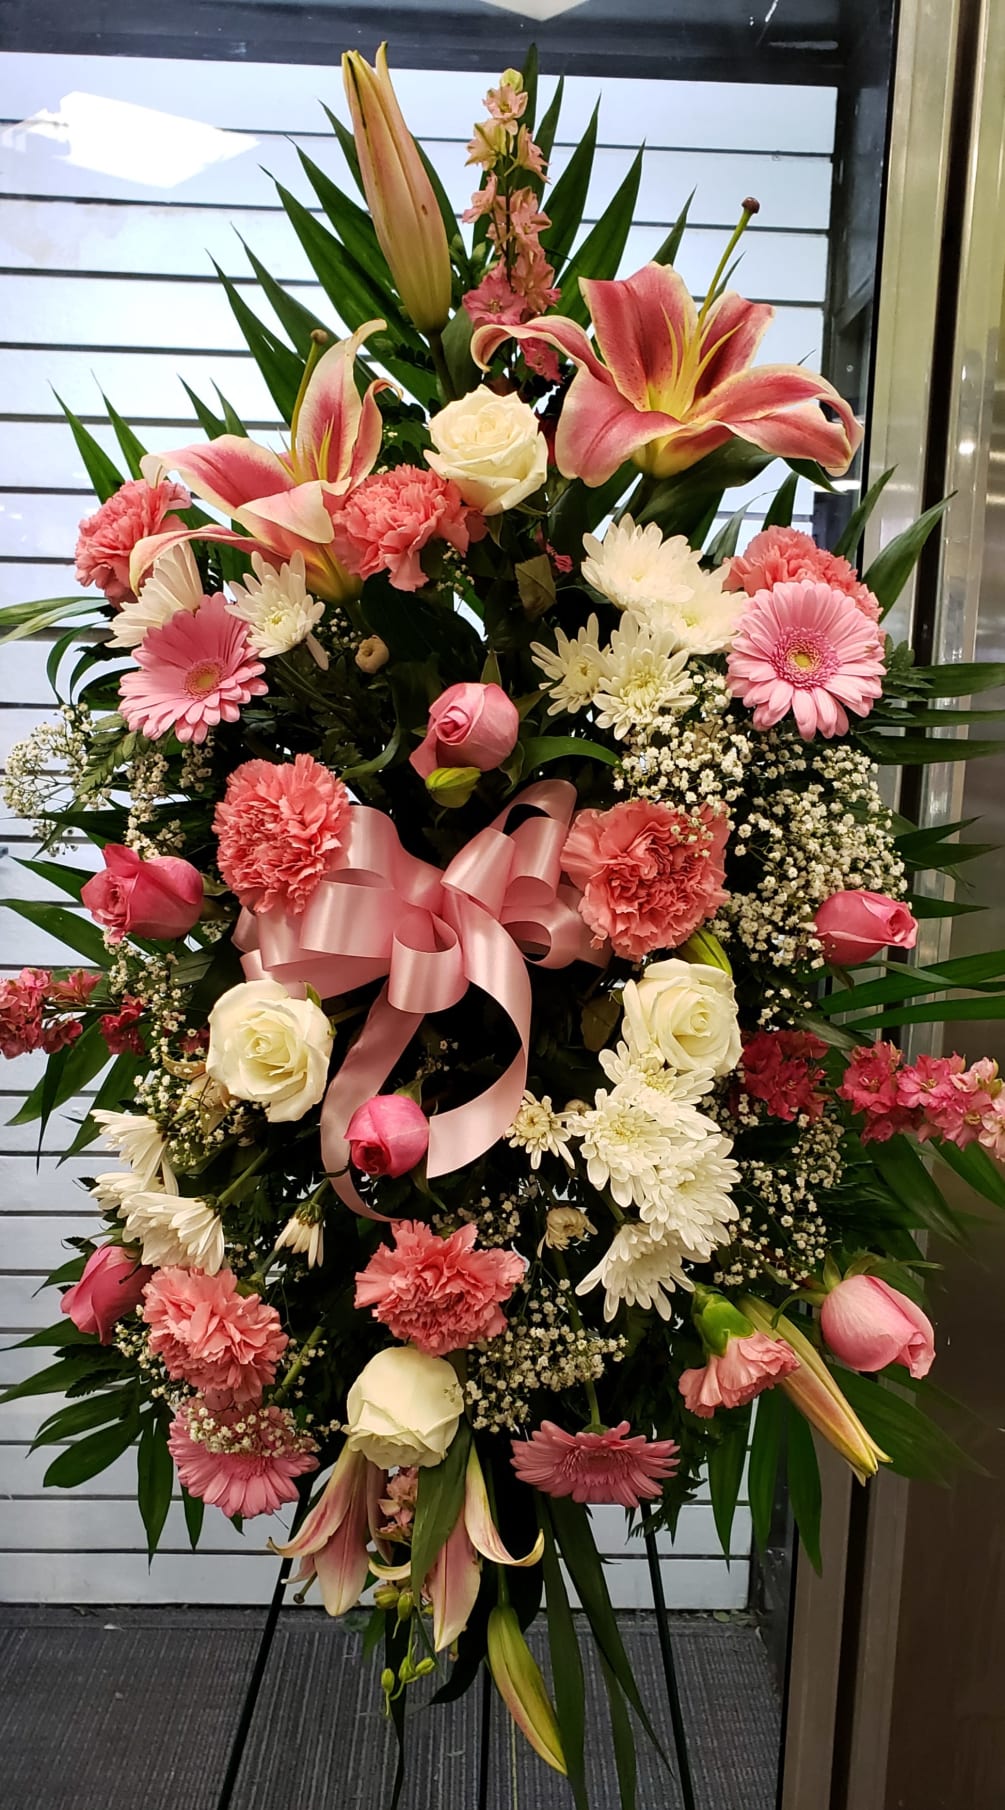 This gorgeous pink and white standing spray is a great way to